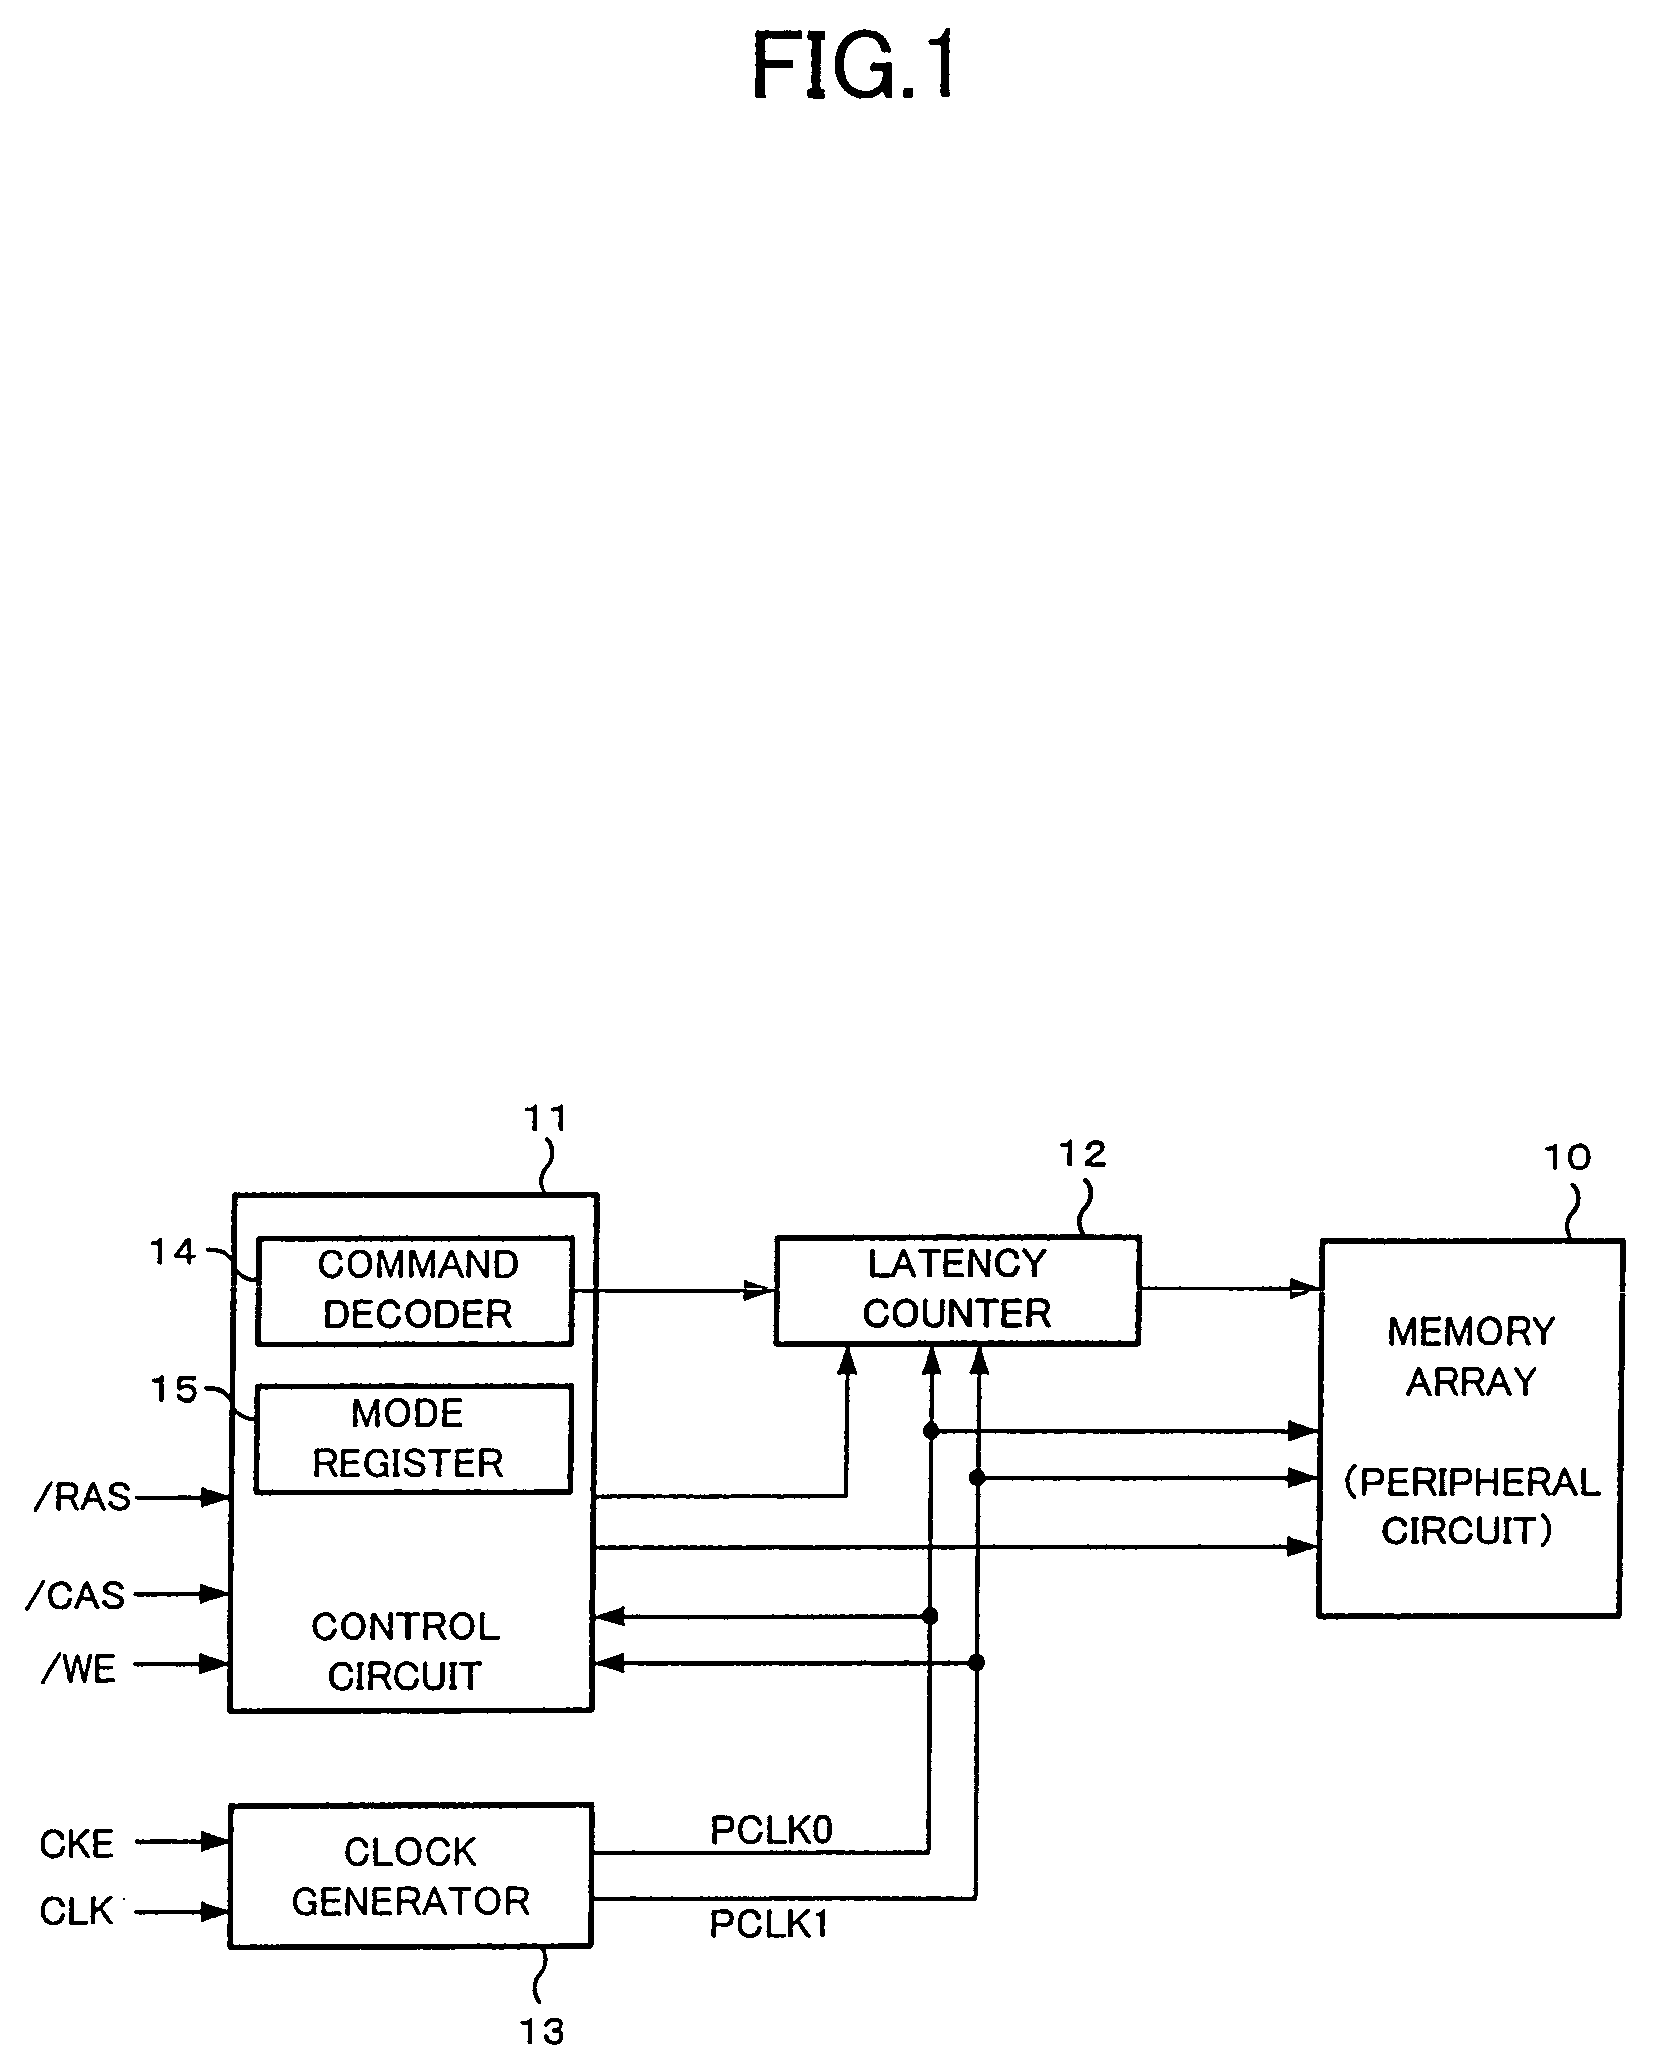 Synchronous semiconductor memory device